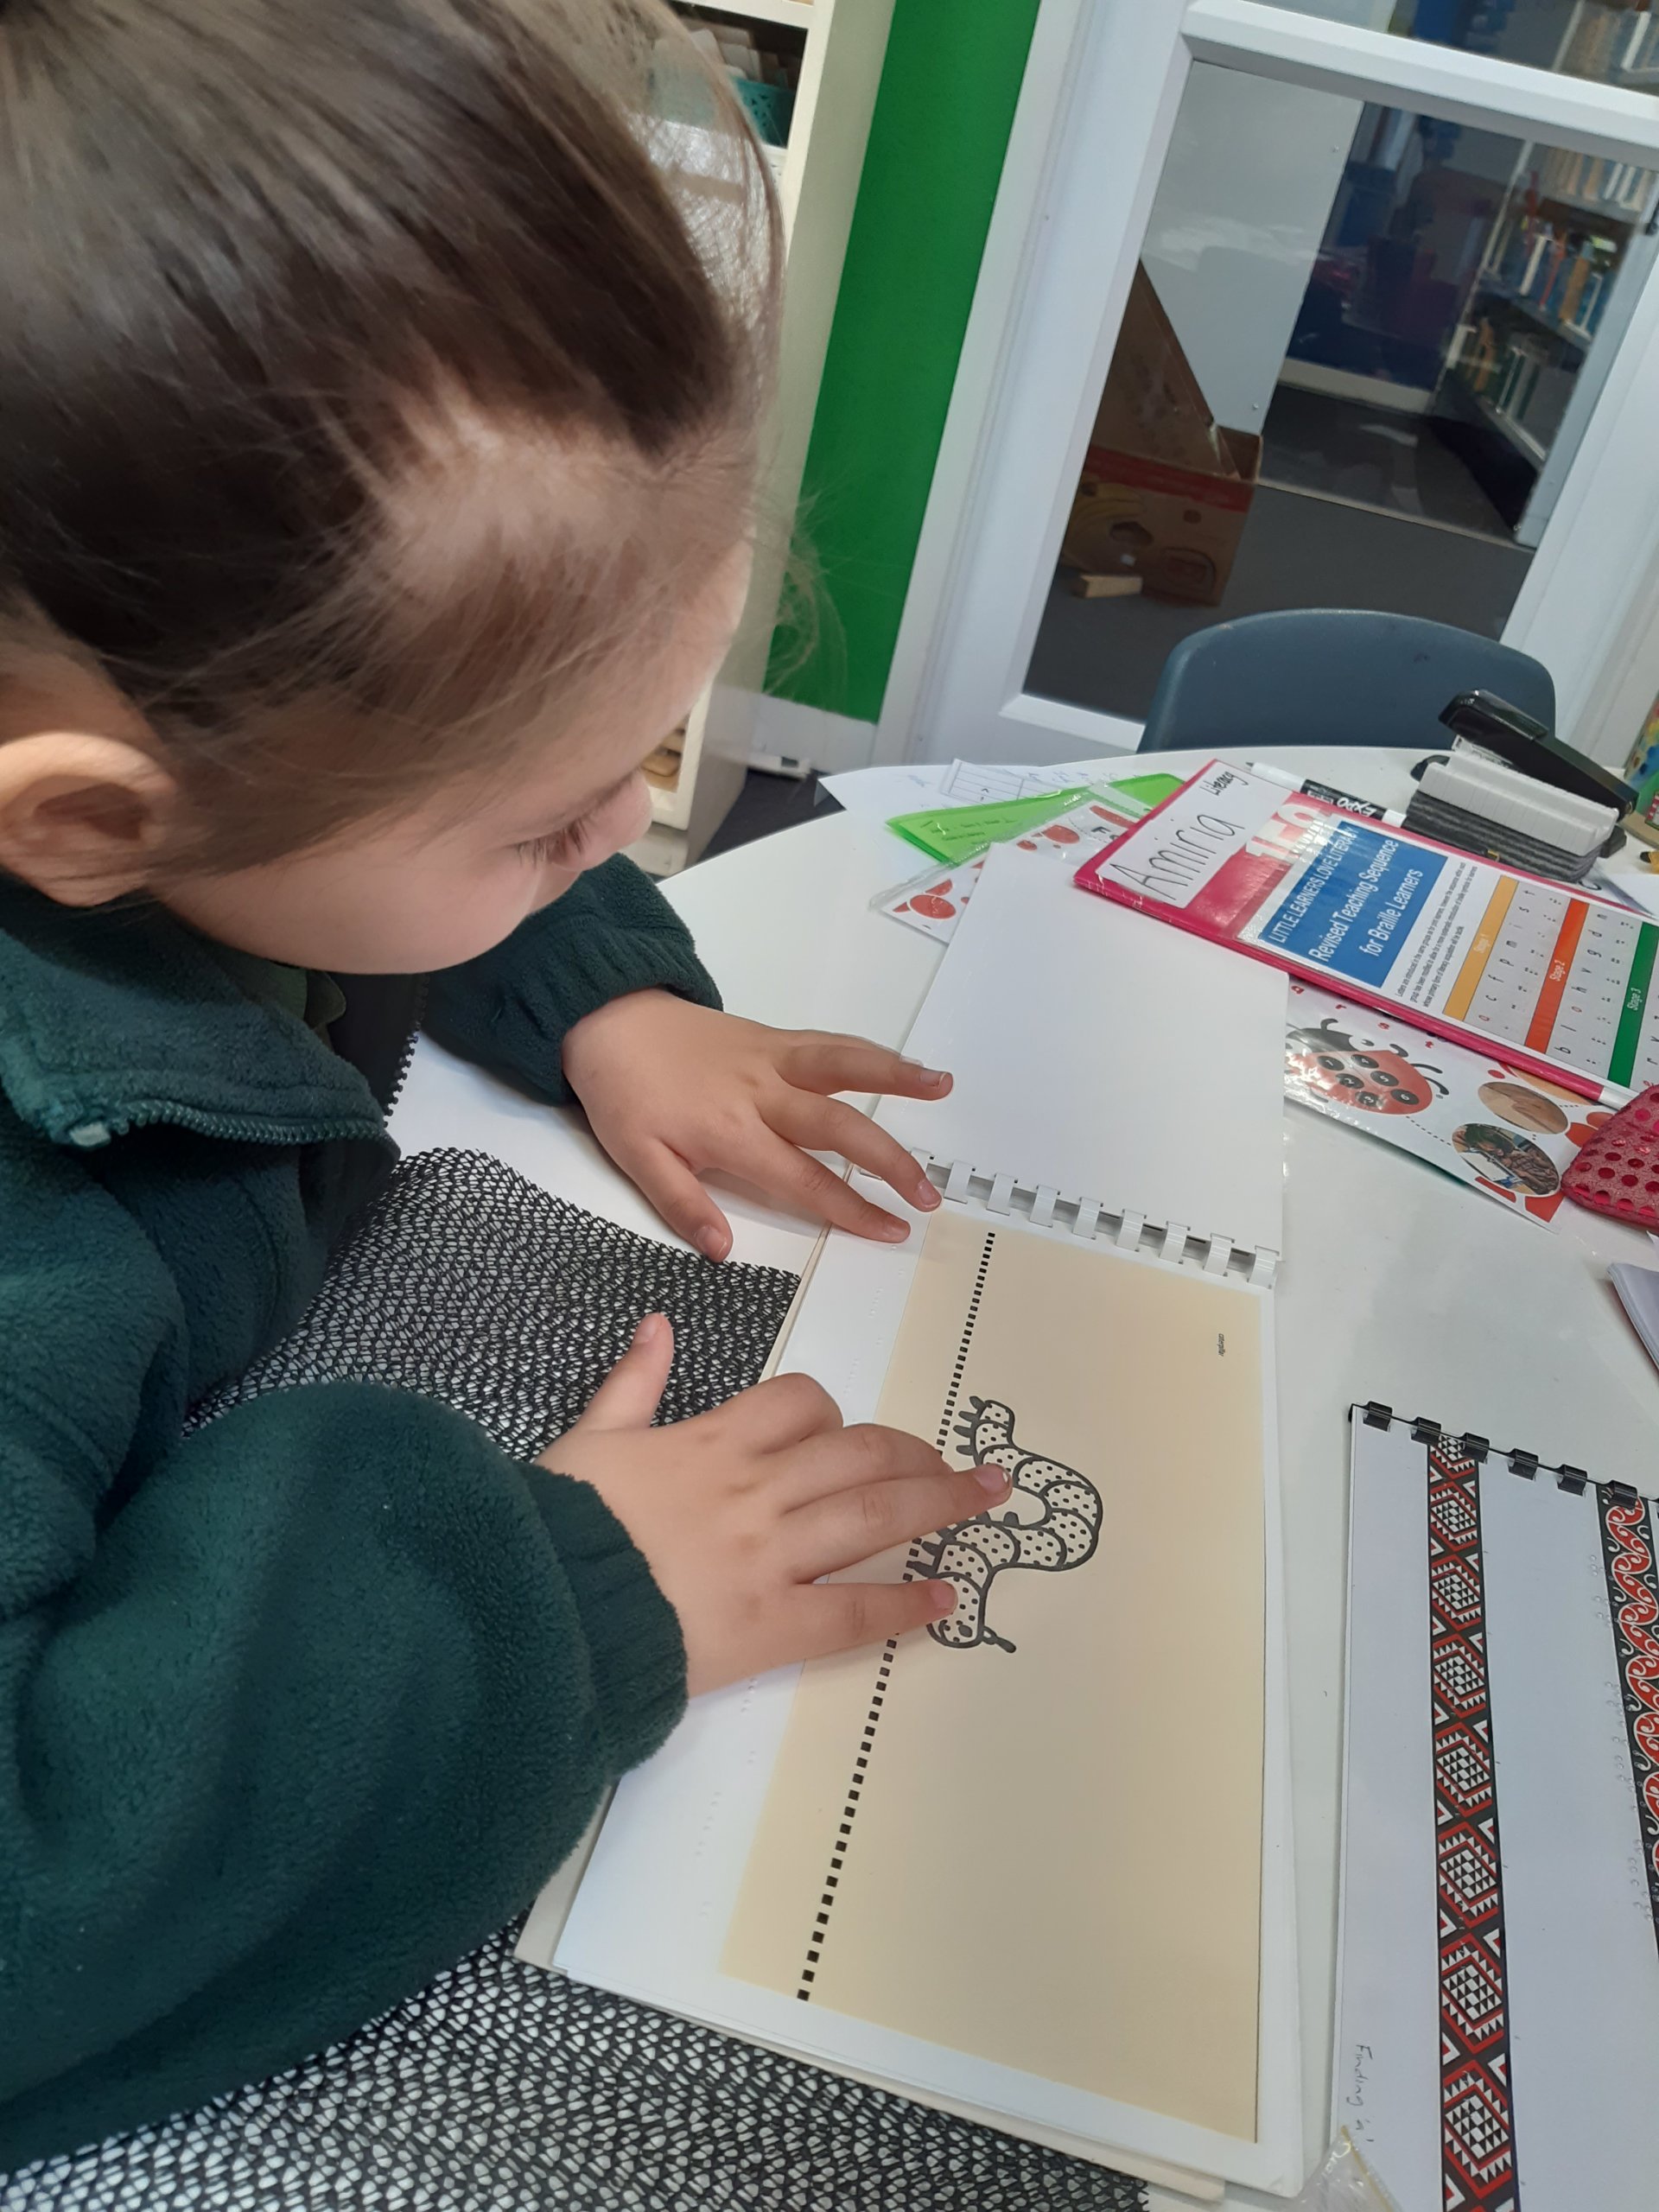 Figure 3 - Amiria has her fingers on the wheels of the tactile graphic of a car. The matching car is above the picture on the table. 